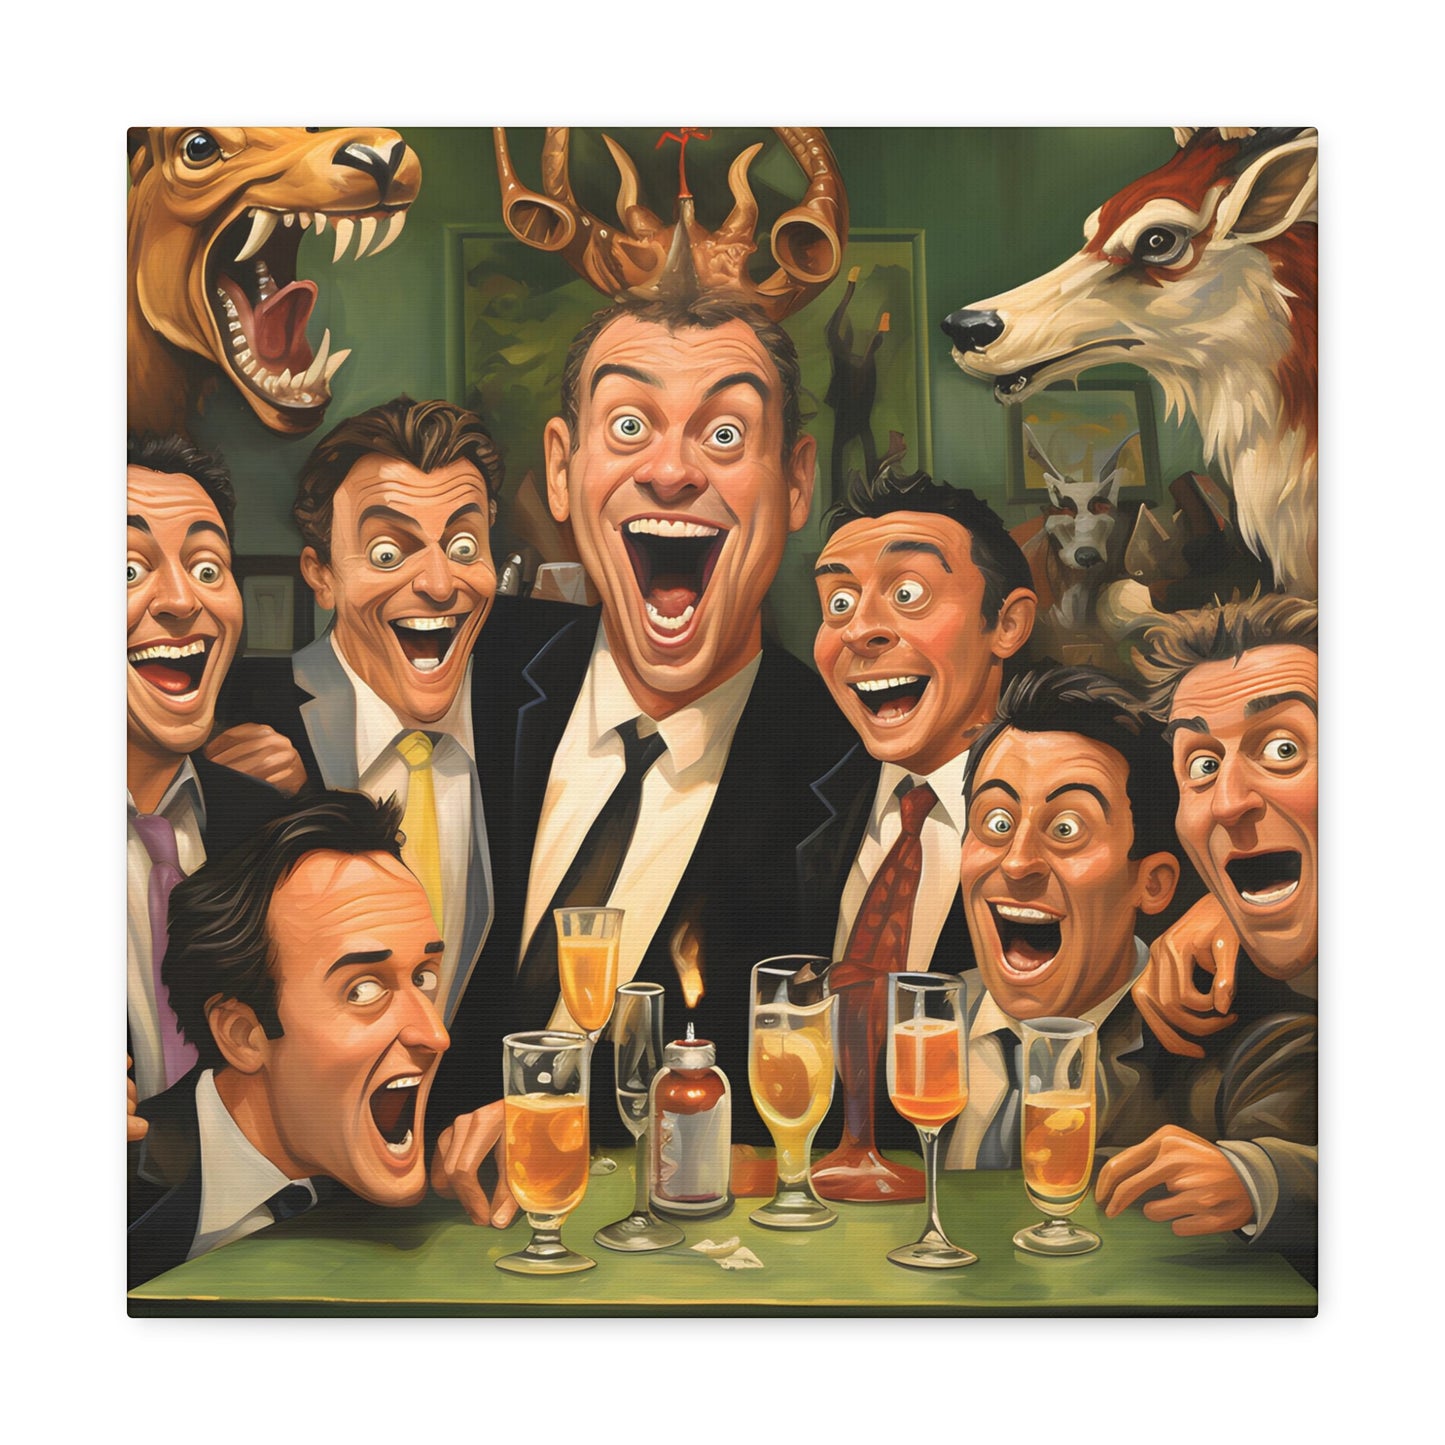 Cheers to the Groom: A Wild Night's Tale' by Archie Goodwin, a jubilant portrayal of a stag night full of laughter and camaraderie. The artwork features a backdrop of taxidermy and toasts, with each character's exaggerated expression telling a story of epic merriment and brotherhood